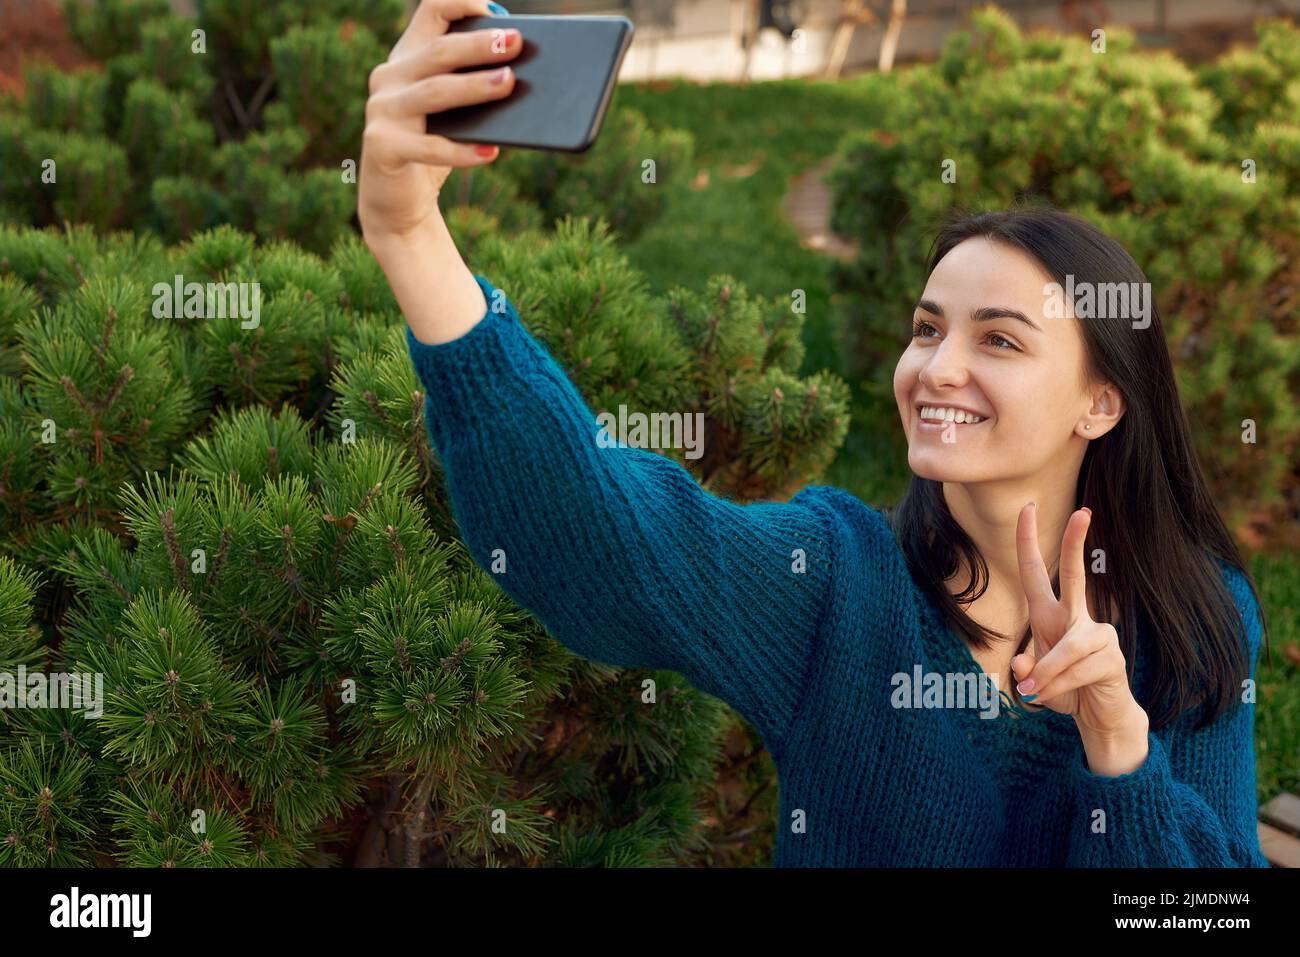 Lady making selfie on a mobile phone camera in a picturesque yard Stock Photo